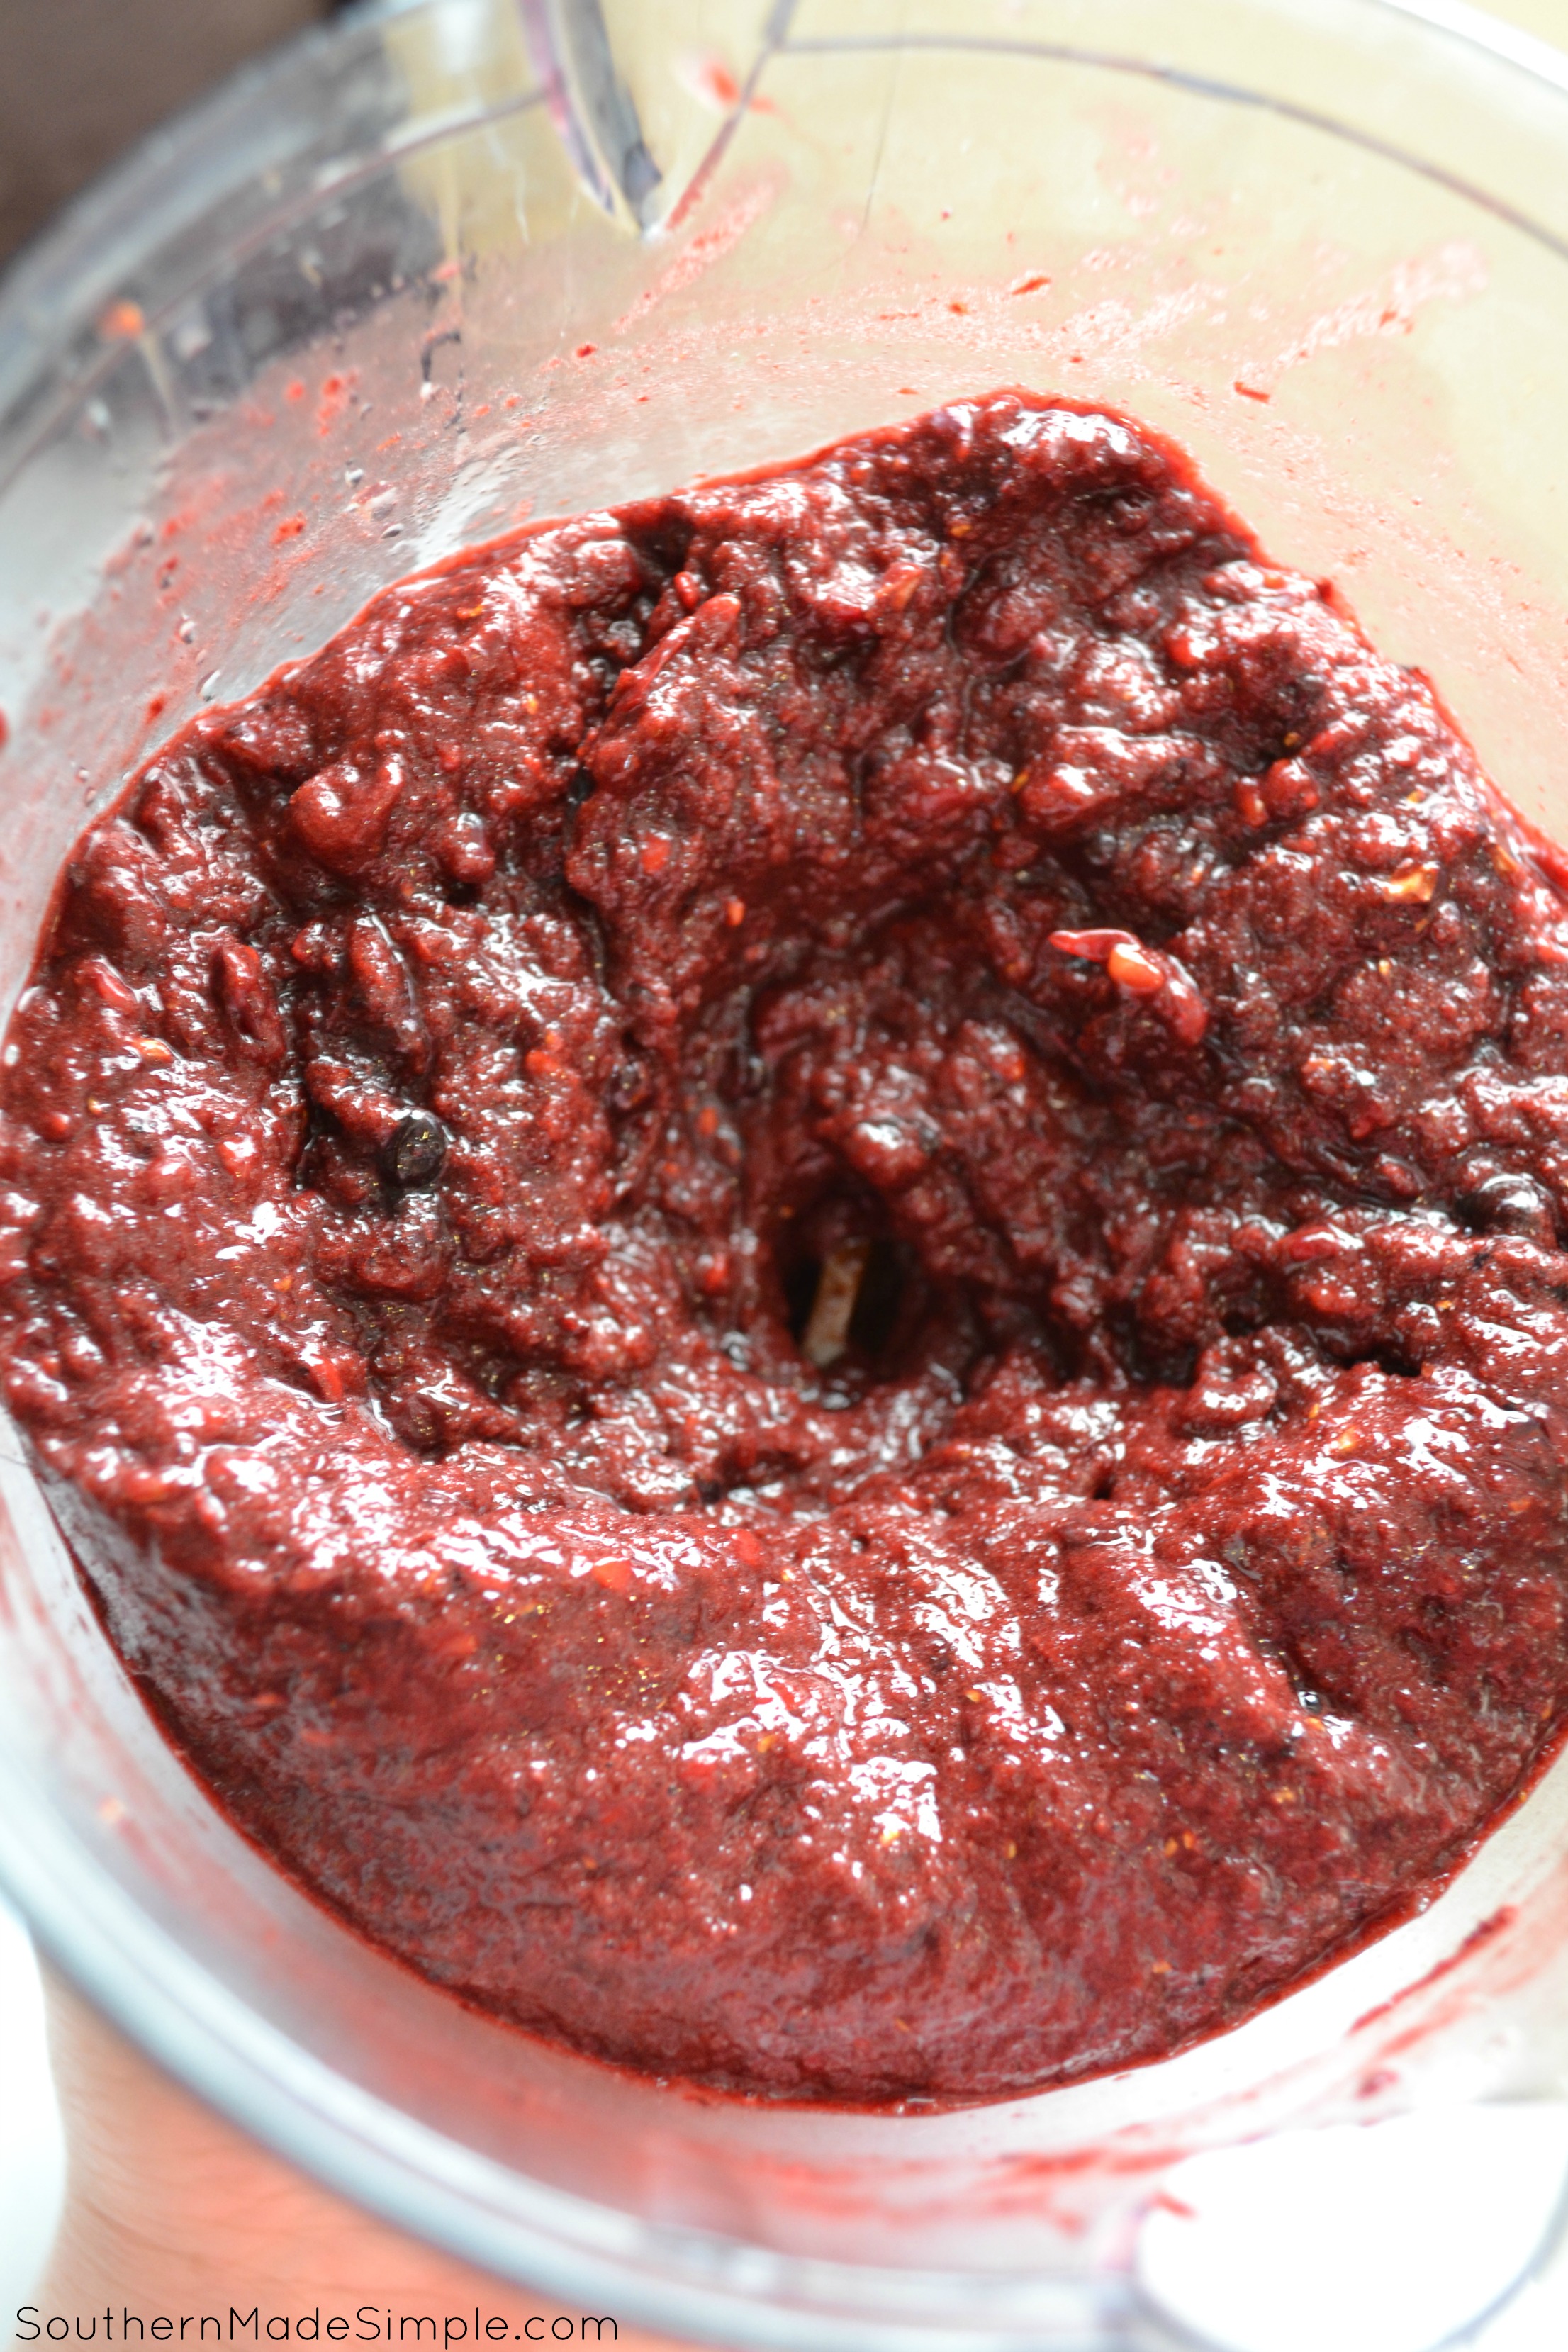 Blackberry Jalapeno Pepper Jelly Recipe - a really simple recipe to make the sweetest jelly around - with a hint of heat!